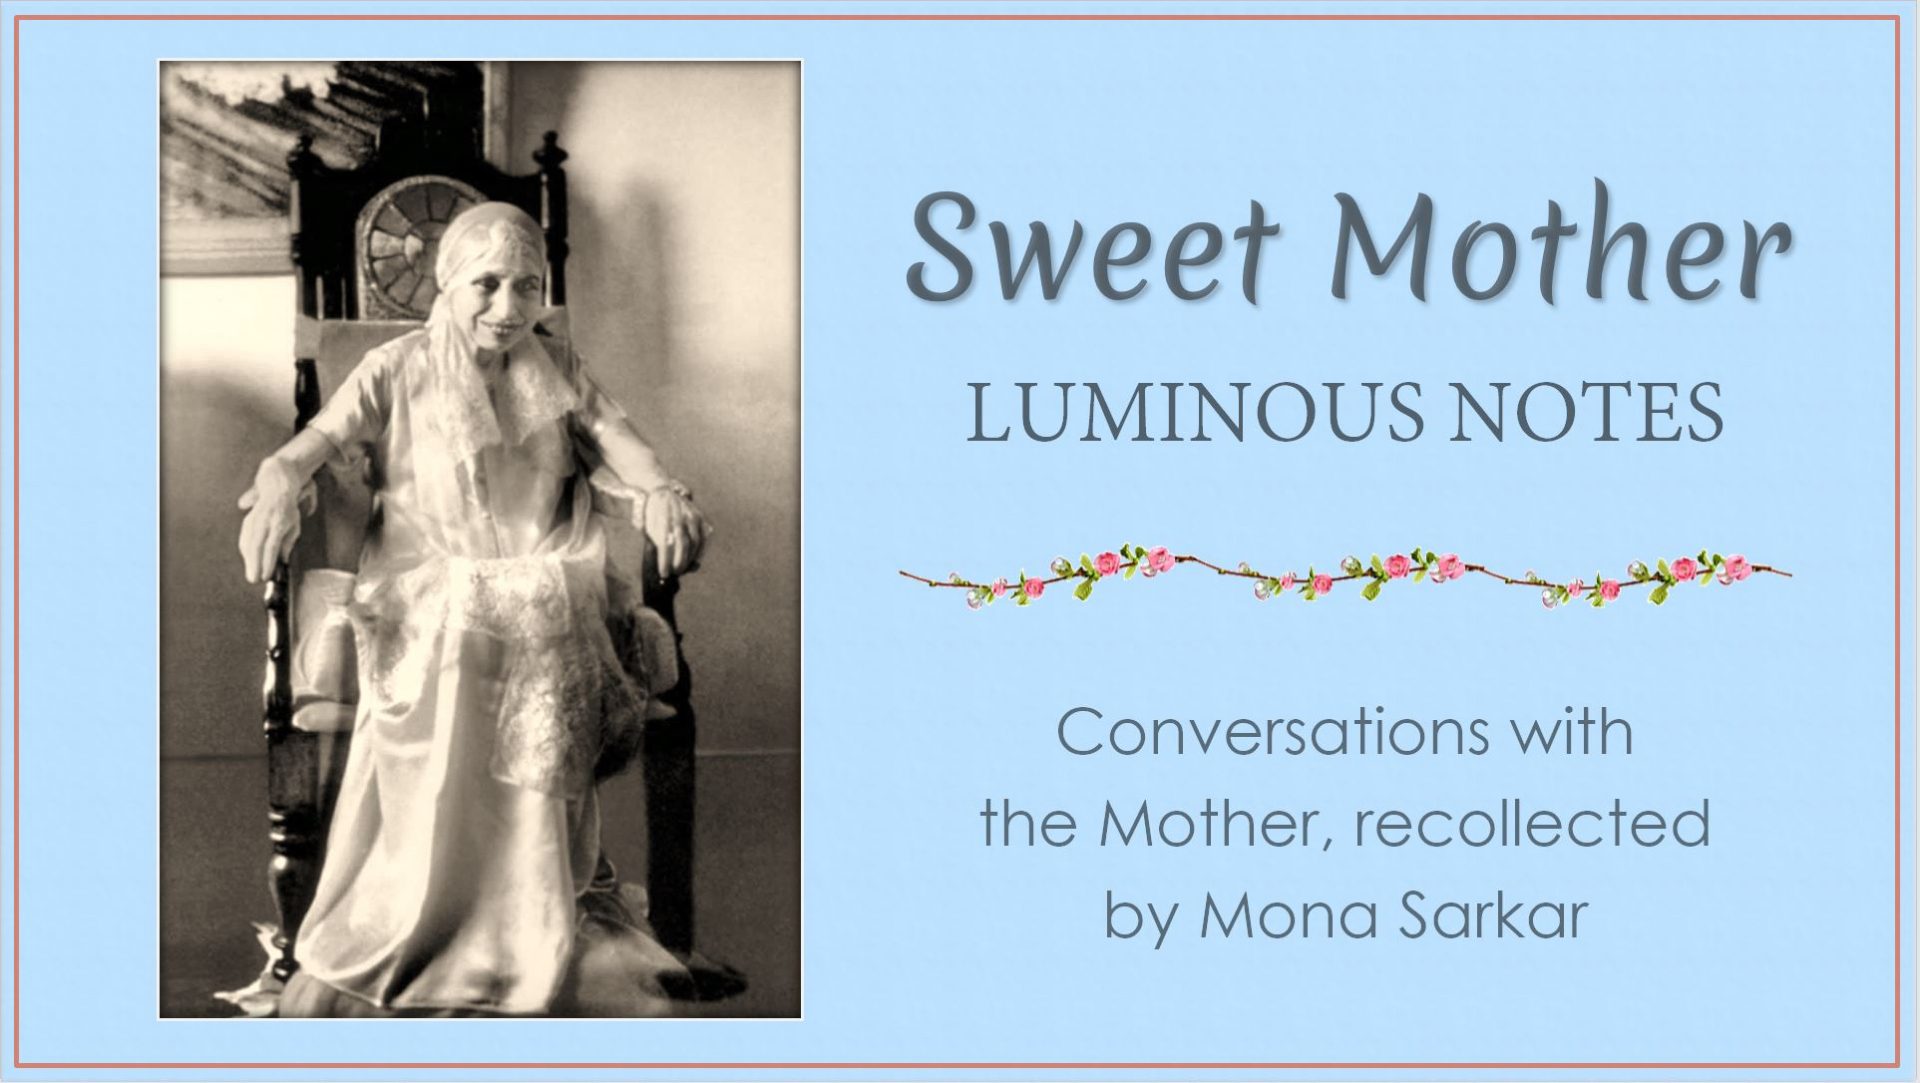 Link to the page with a full text of the book "Sweet Mother - Luminous Notes" by Mona Sarkar